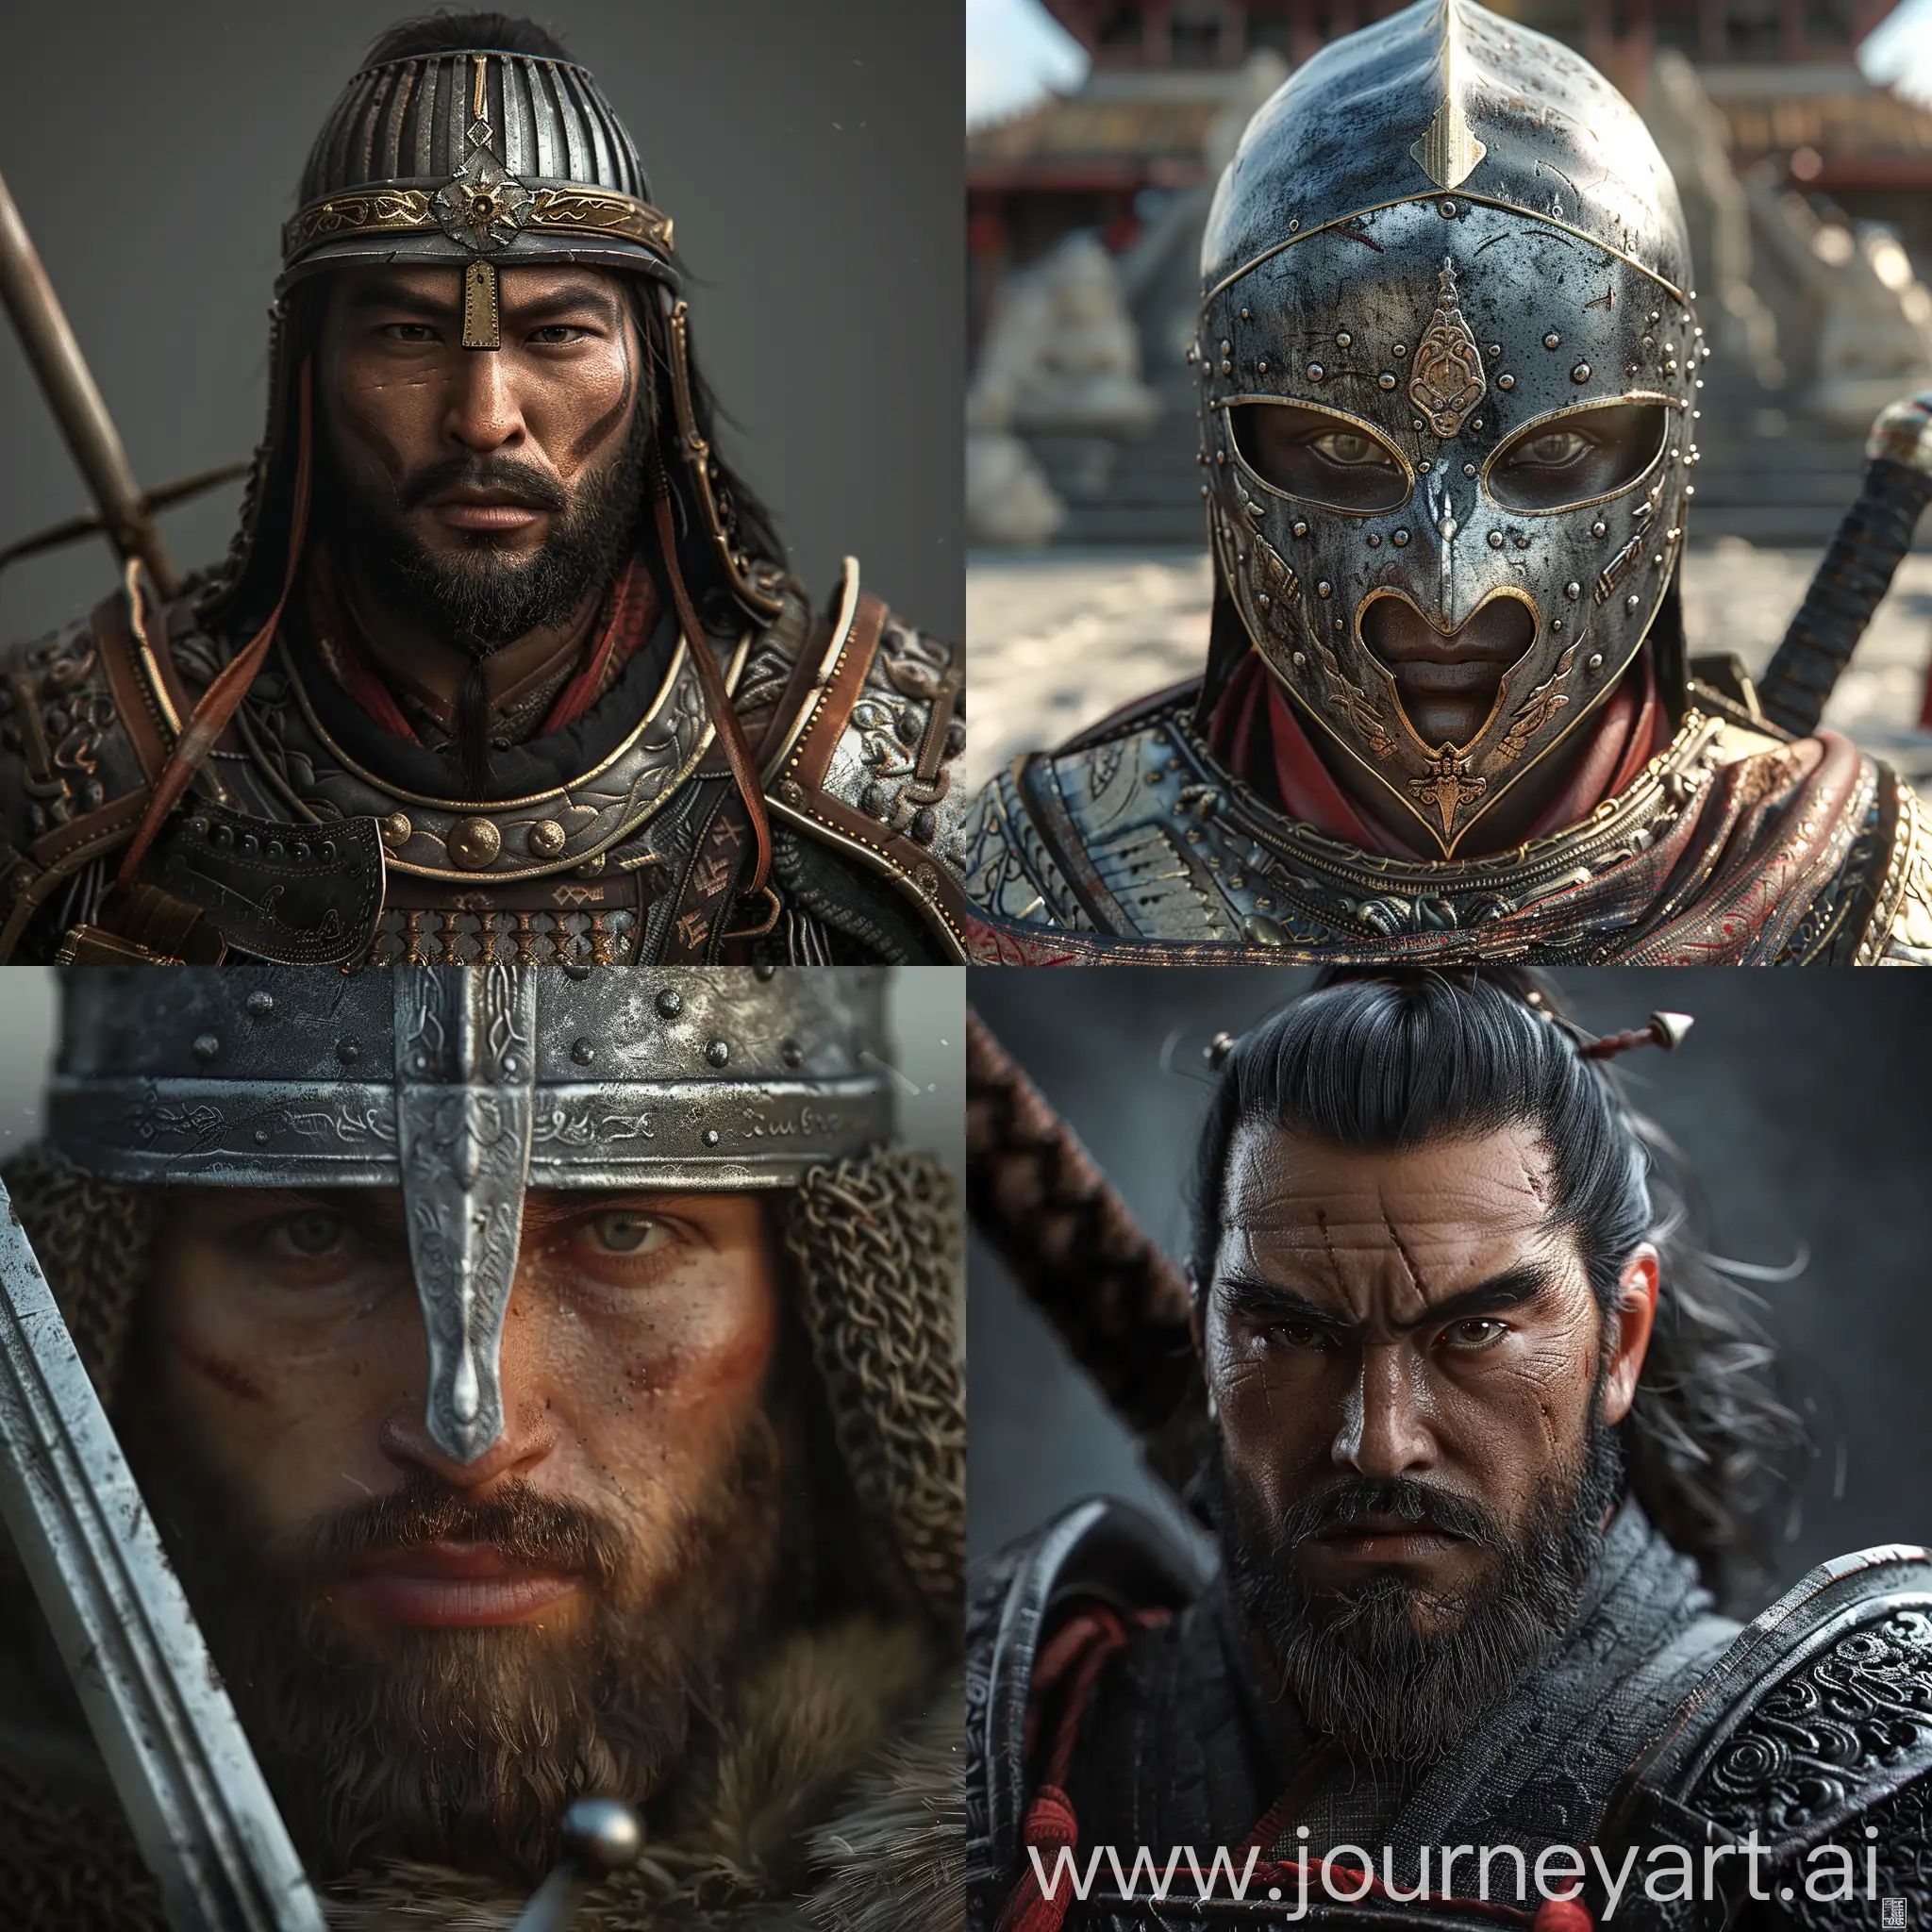 Medieval-Buddhist-Warrior-from-Liava-in-HyperRealistic-Detail